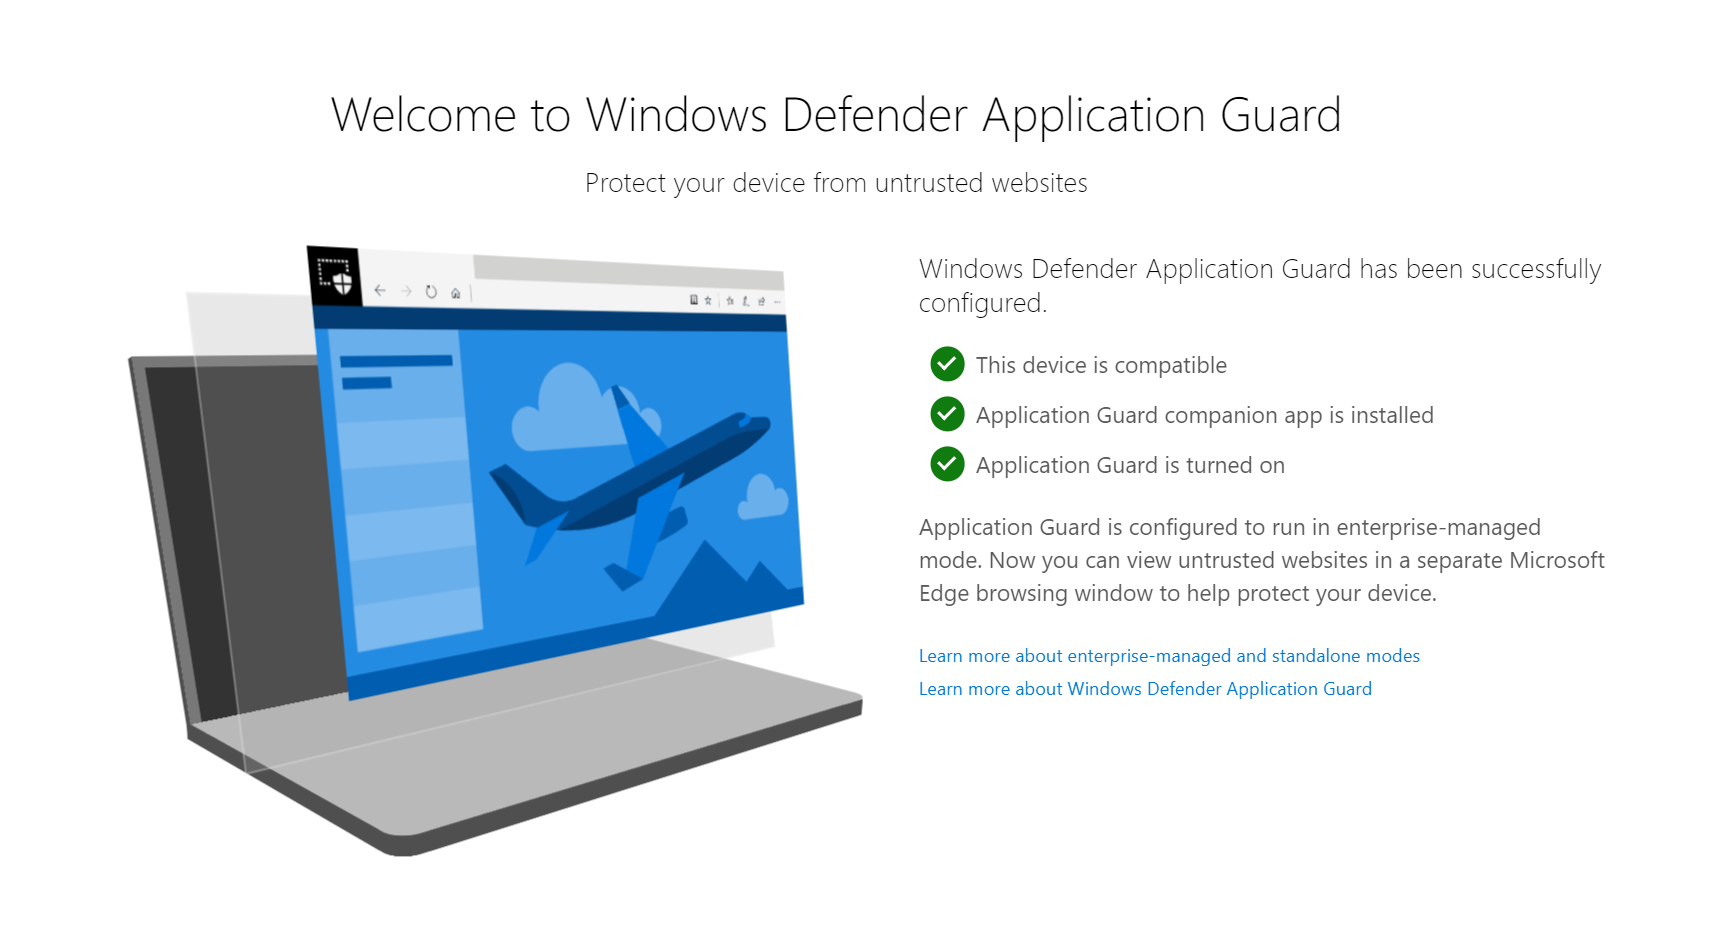 Intel Software Guard Extension windows-defender-application-guard-components-complete.png